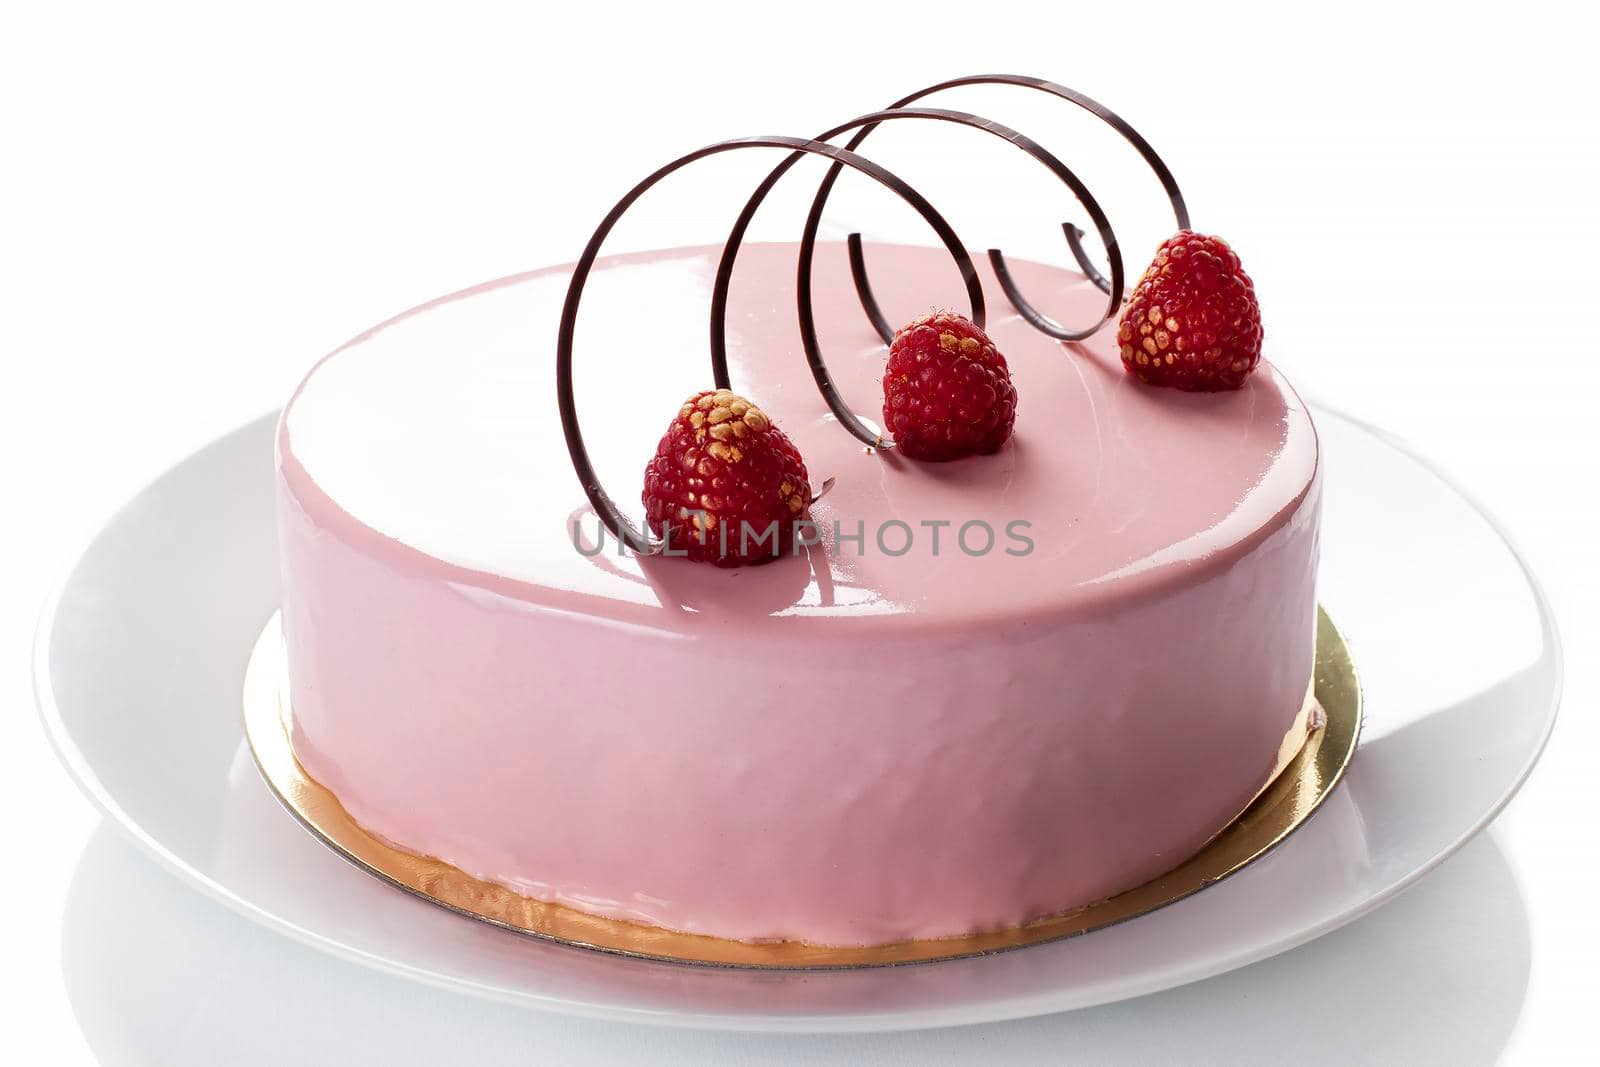 Pastry: Raspberries Cake. Jellies and souffle by Jyliana